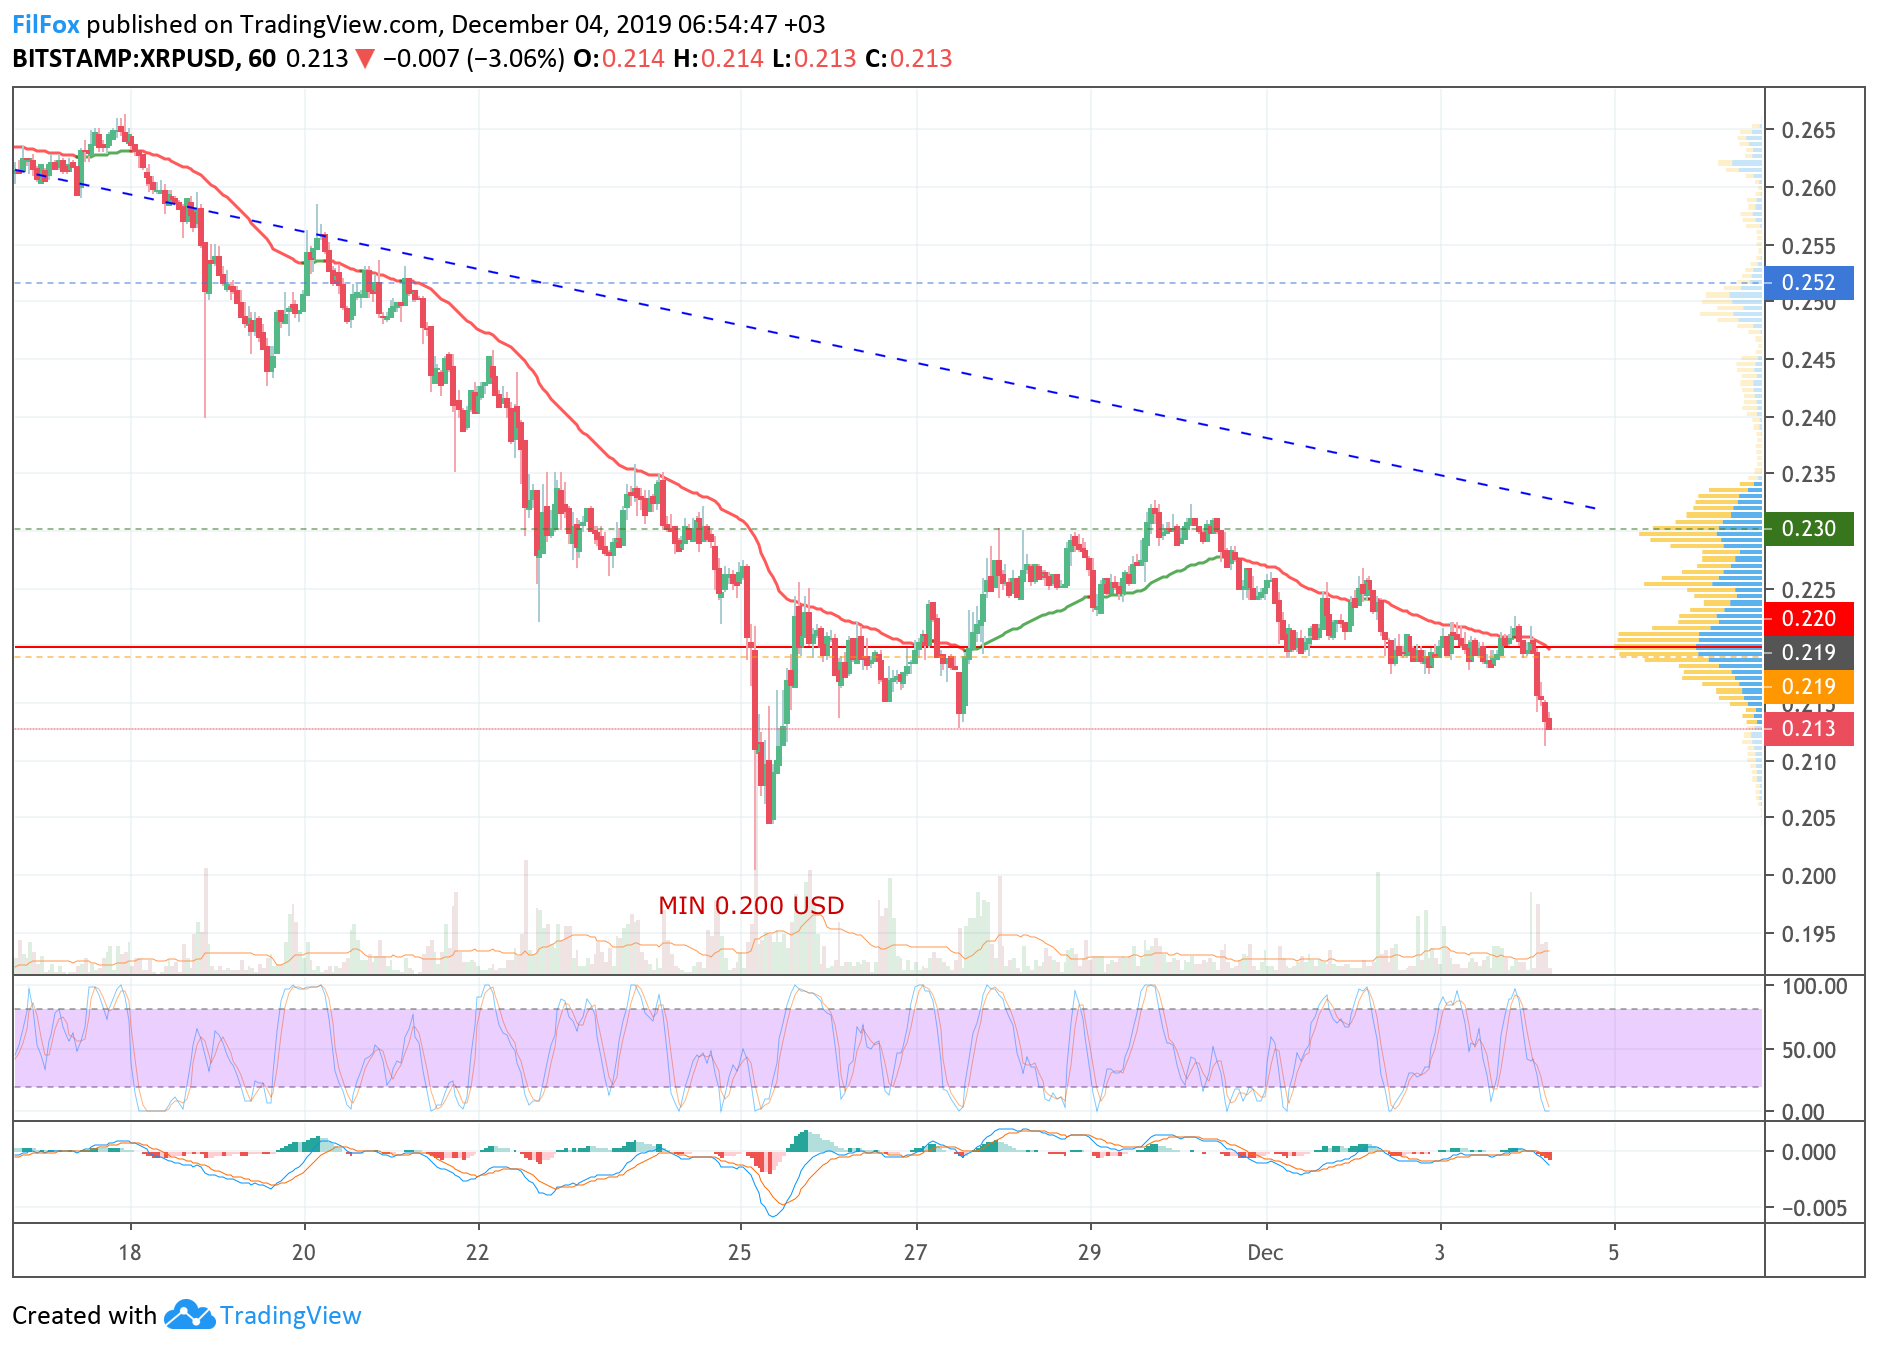 Analysis of cryptocurrency pairs BTC / USD, ETH / USD and XRP / USD on 12/04/2019